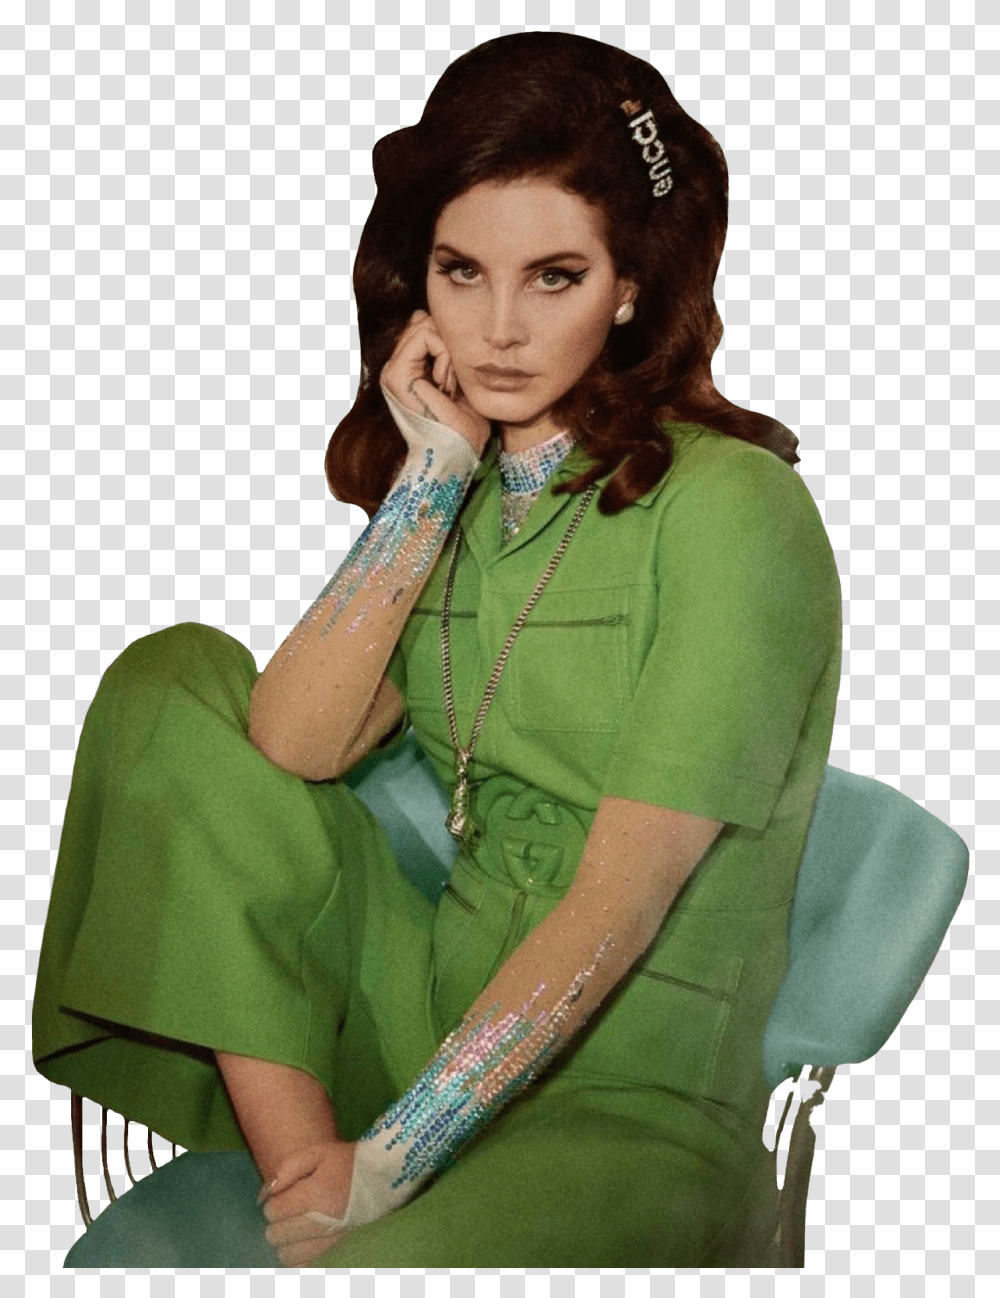 Lana Del Rey High Quality Image Gucci Lana Del Rey, Sleeve, Person, Evening Dress Transparent Png